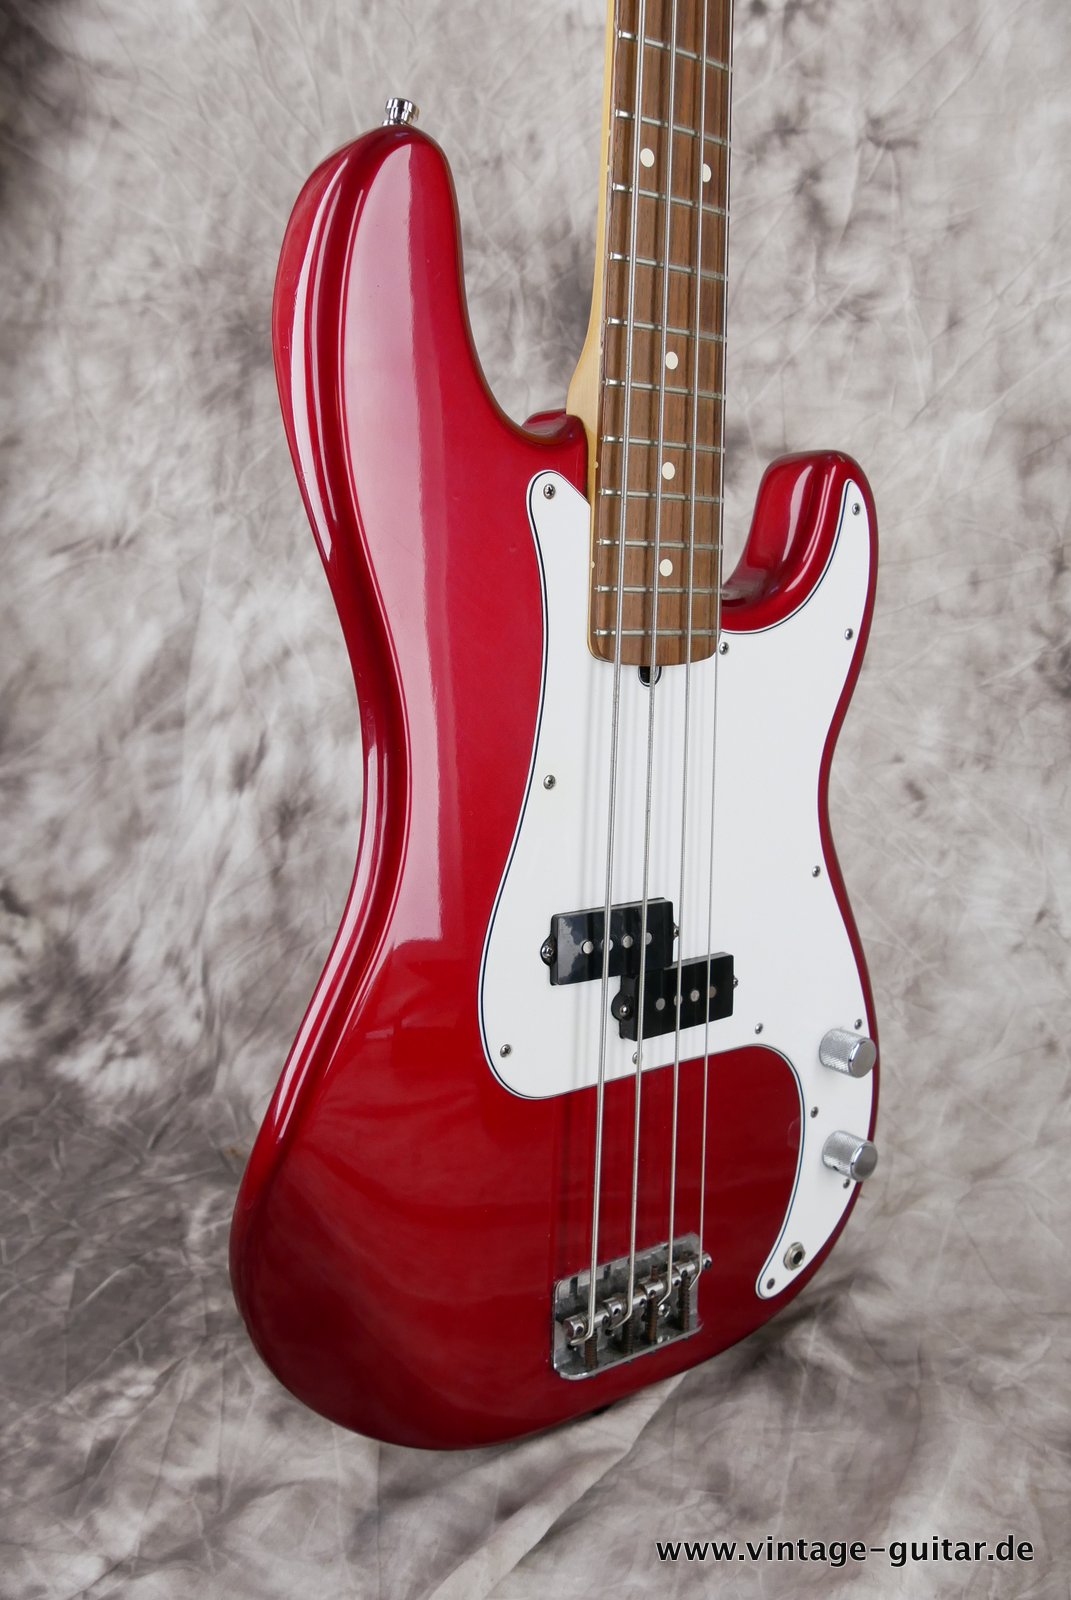 Fender-Precision-Bass-1994-candy-apple-red-005.JPG